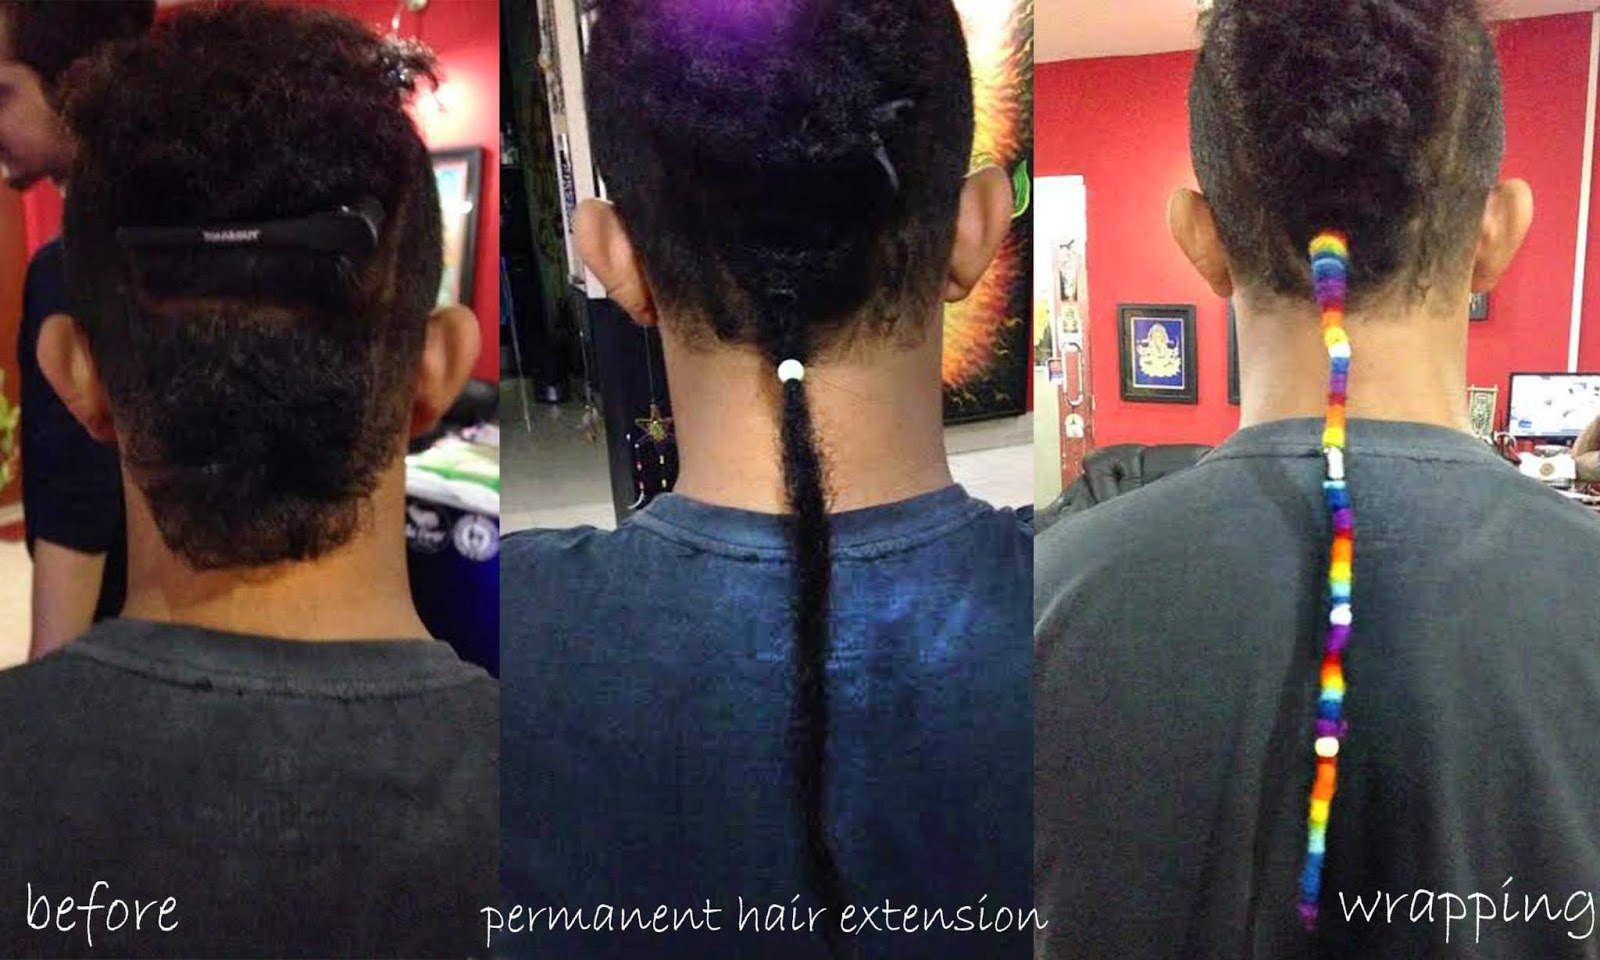 Lizard's Skin Tattoos: Dreadlock Extension and Hair wrapping done in Kolkata